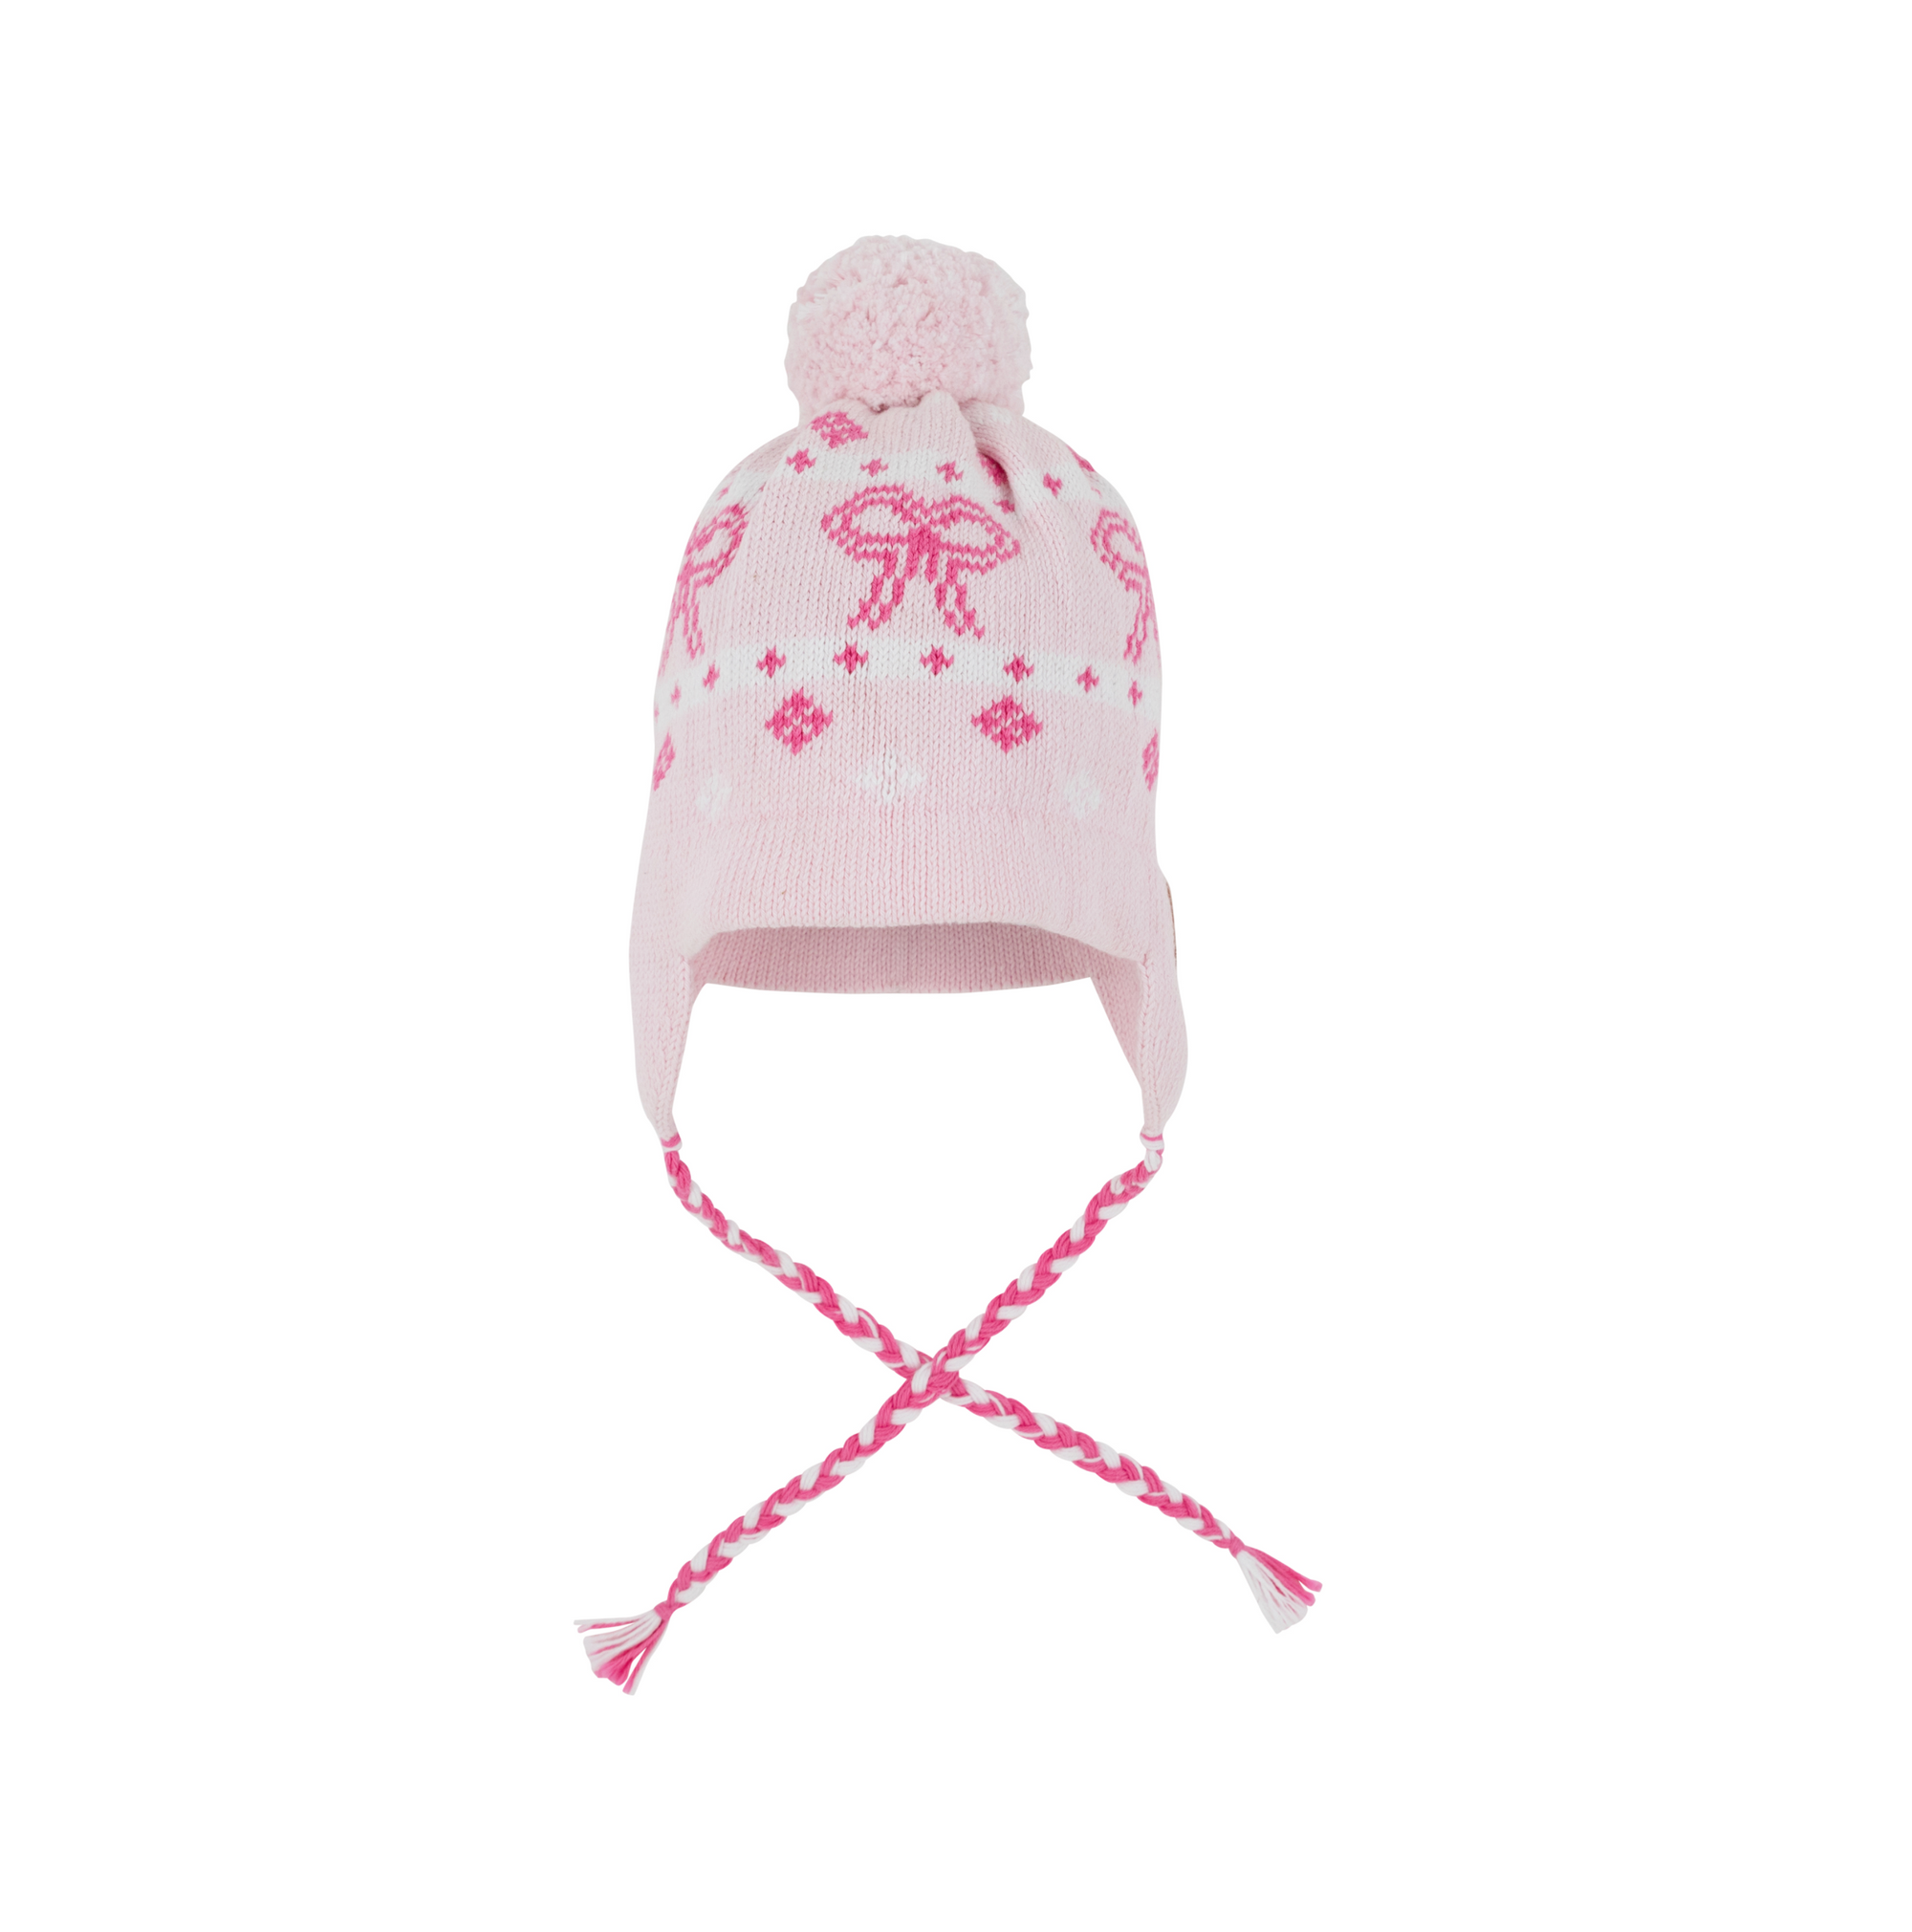 TBBC: Parrish Pom Pom Hat - Palm Beach Pink Knit With Hamptons Hot Pink Bows